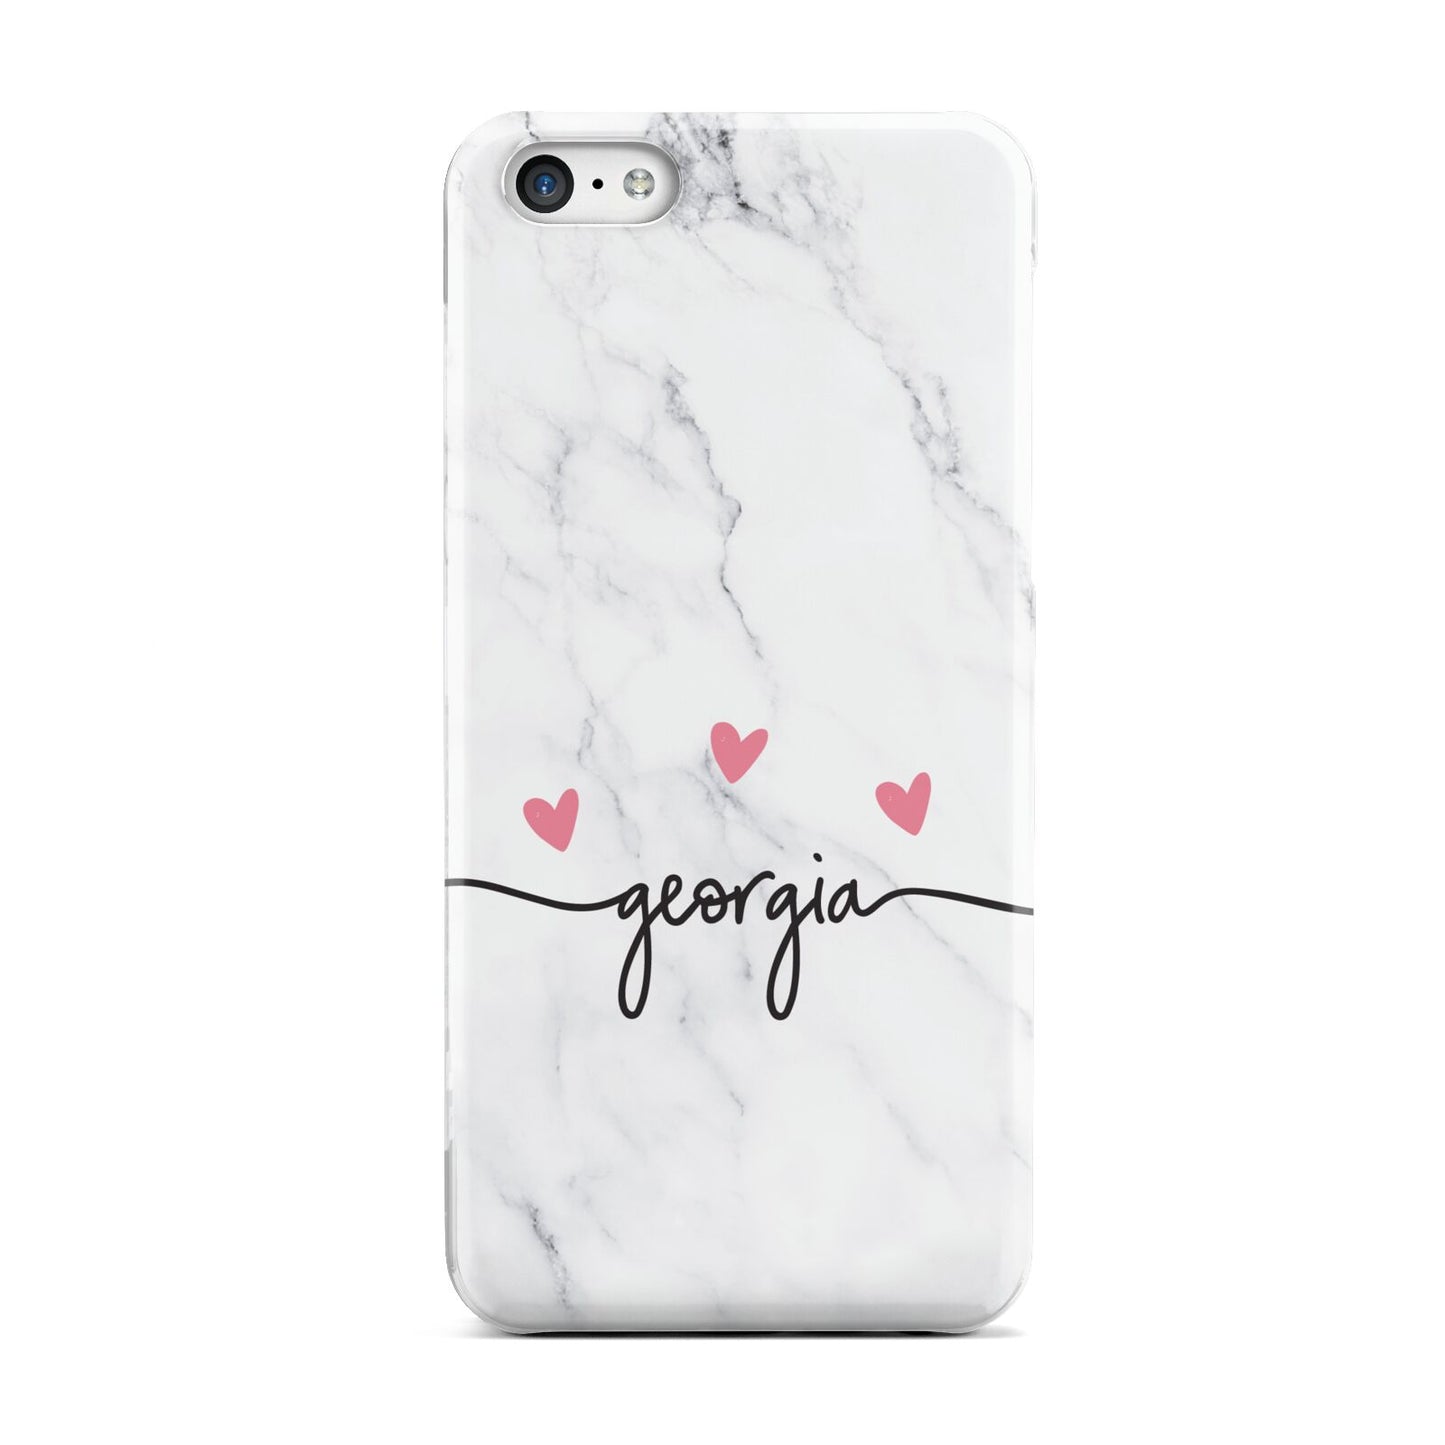 Custom Marble with Handwriting Text Apple iPhone 5c Case